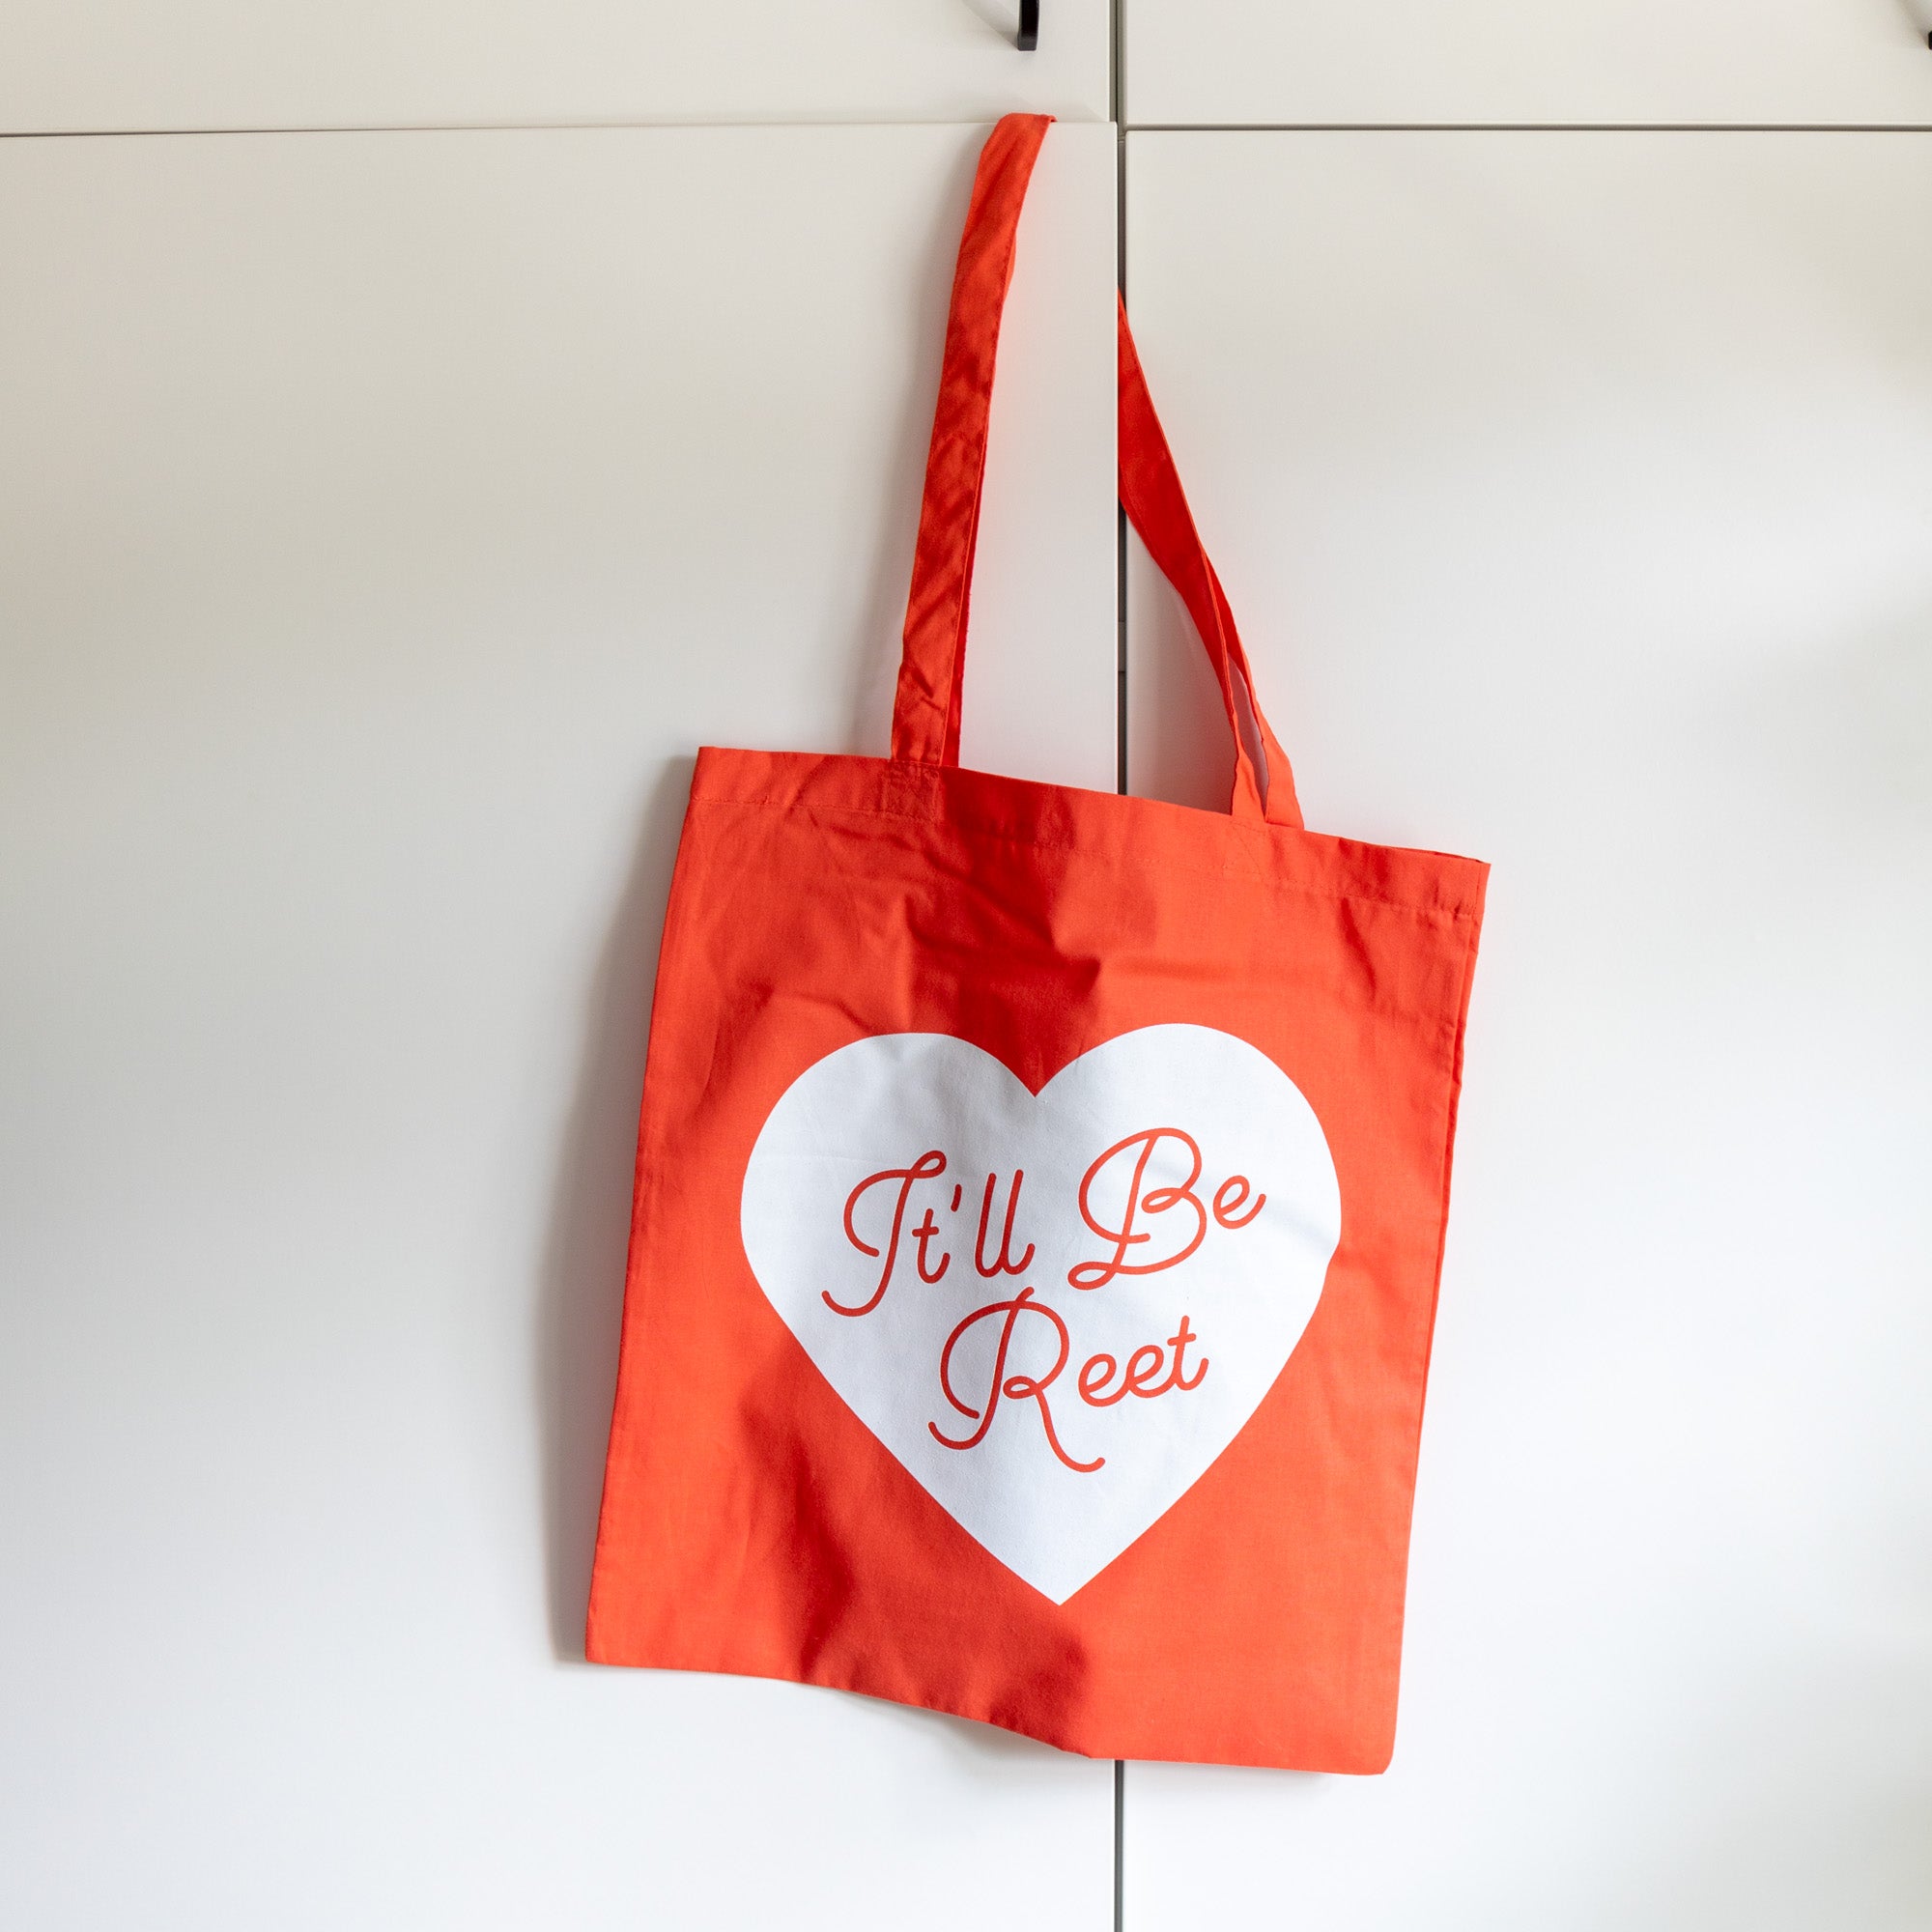 bright shopping tote bag with it'll be reet slogan printed on a white heart